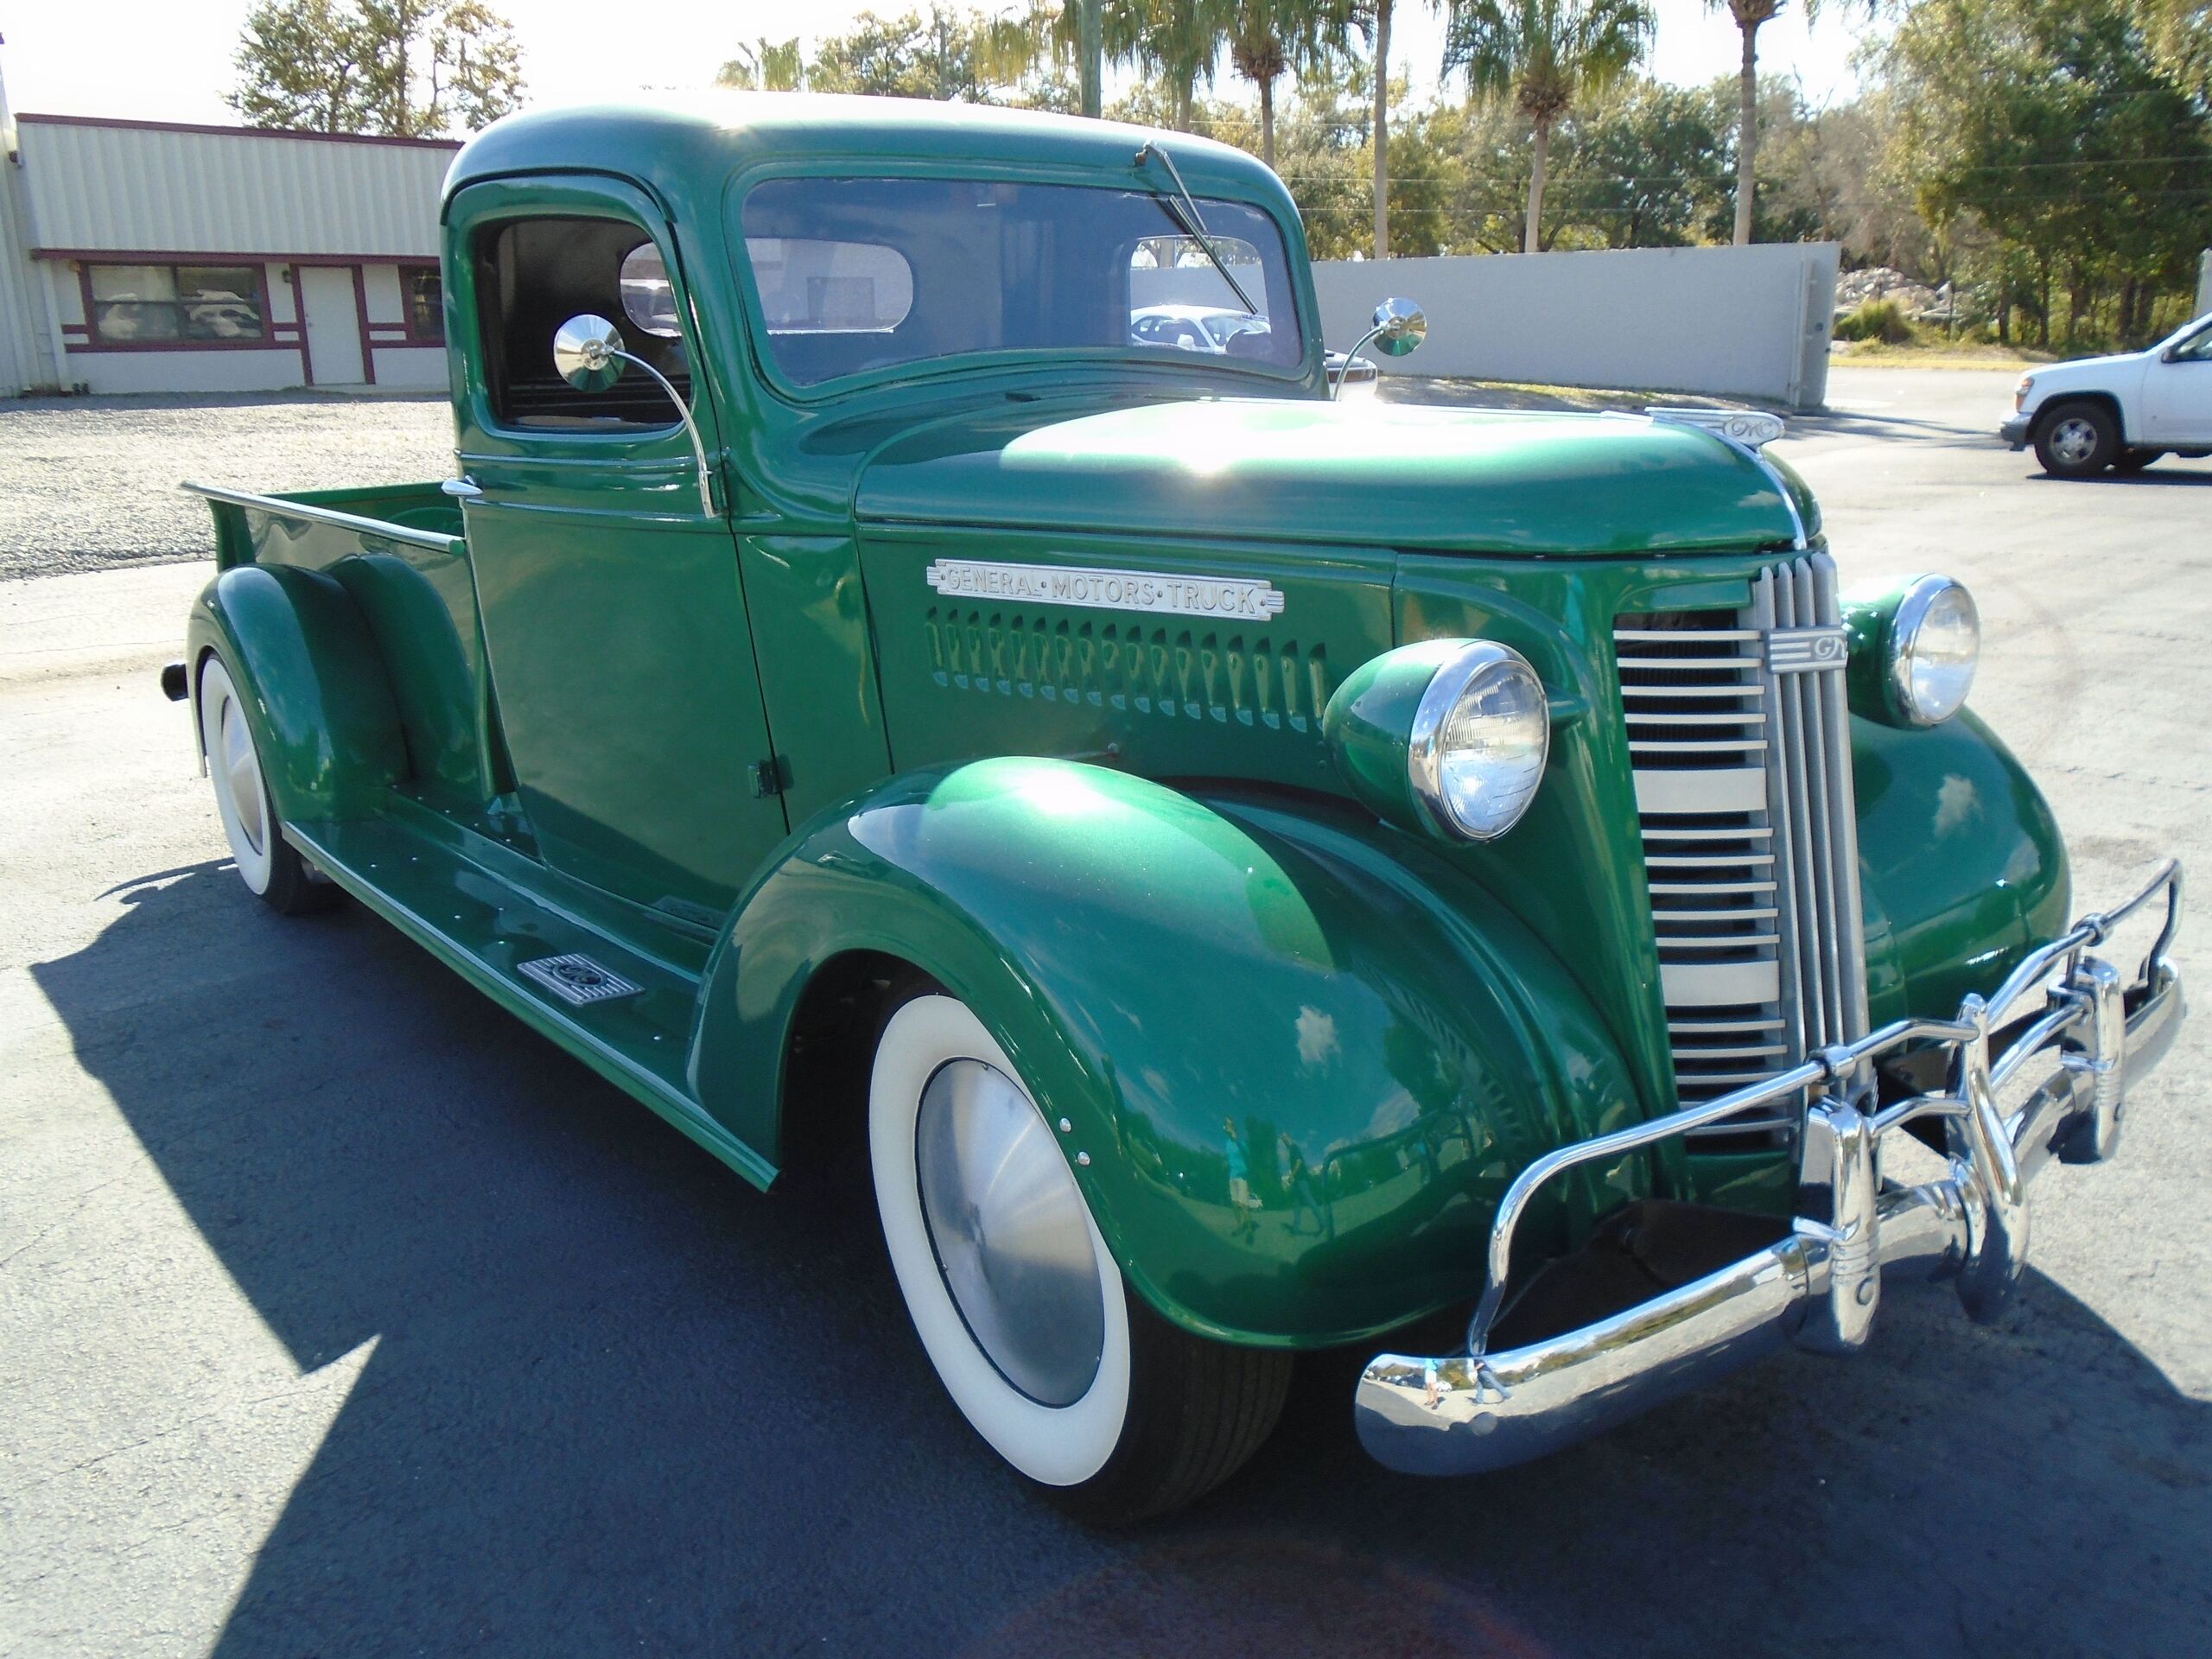 1937 GMC  Long bed  (Longbeds are rare) 3